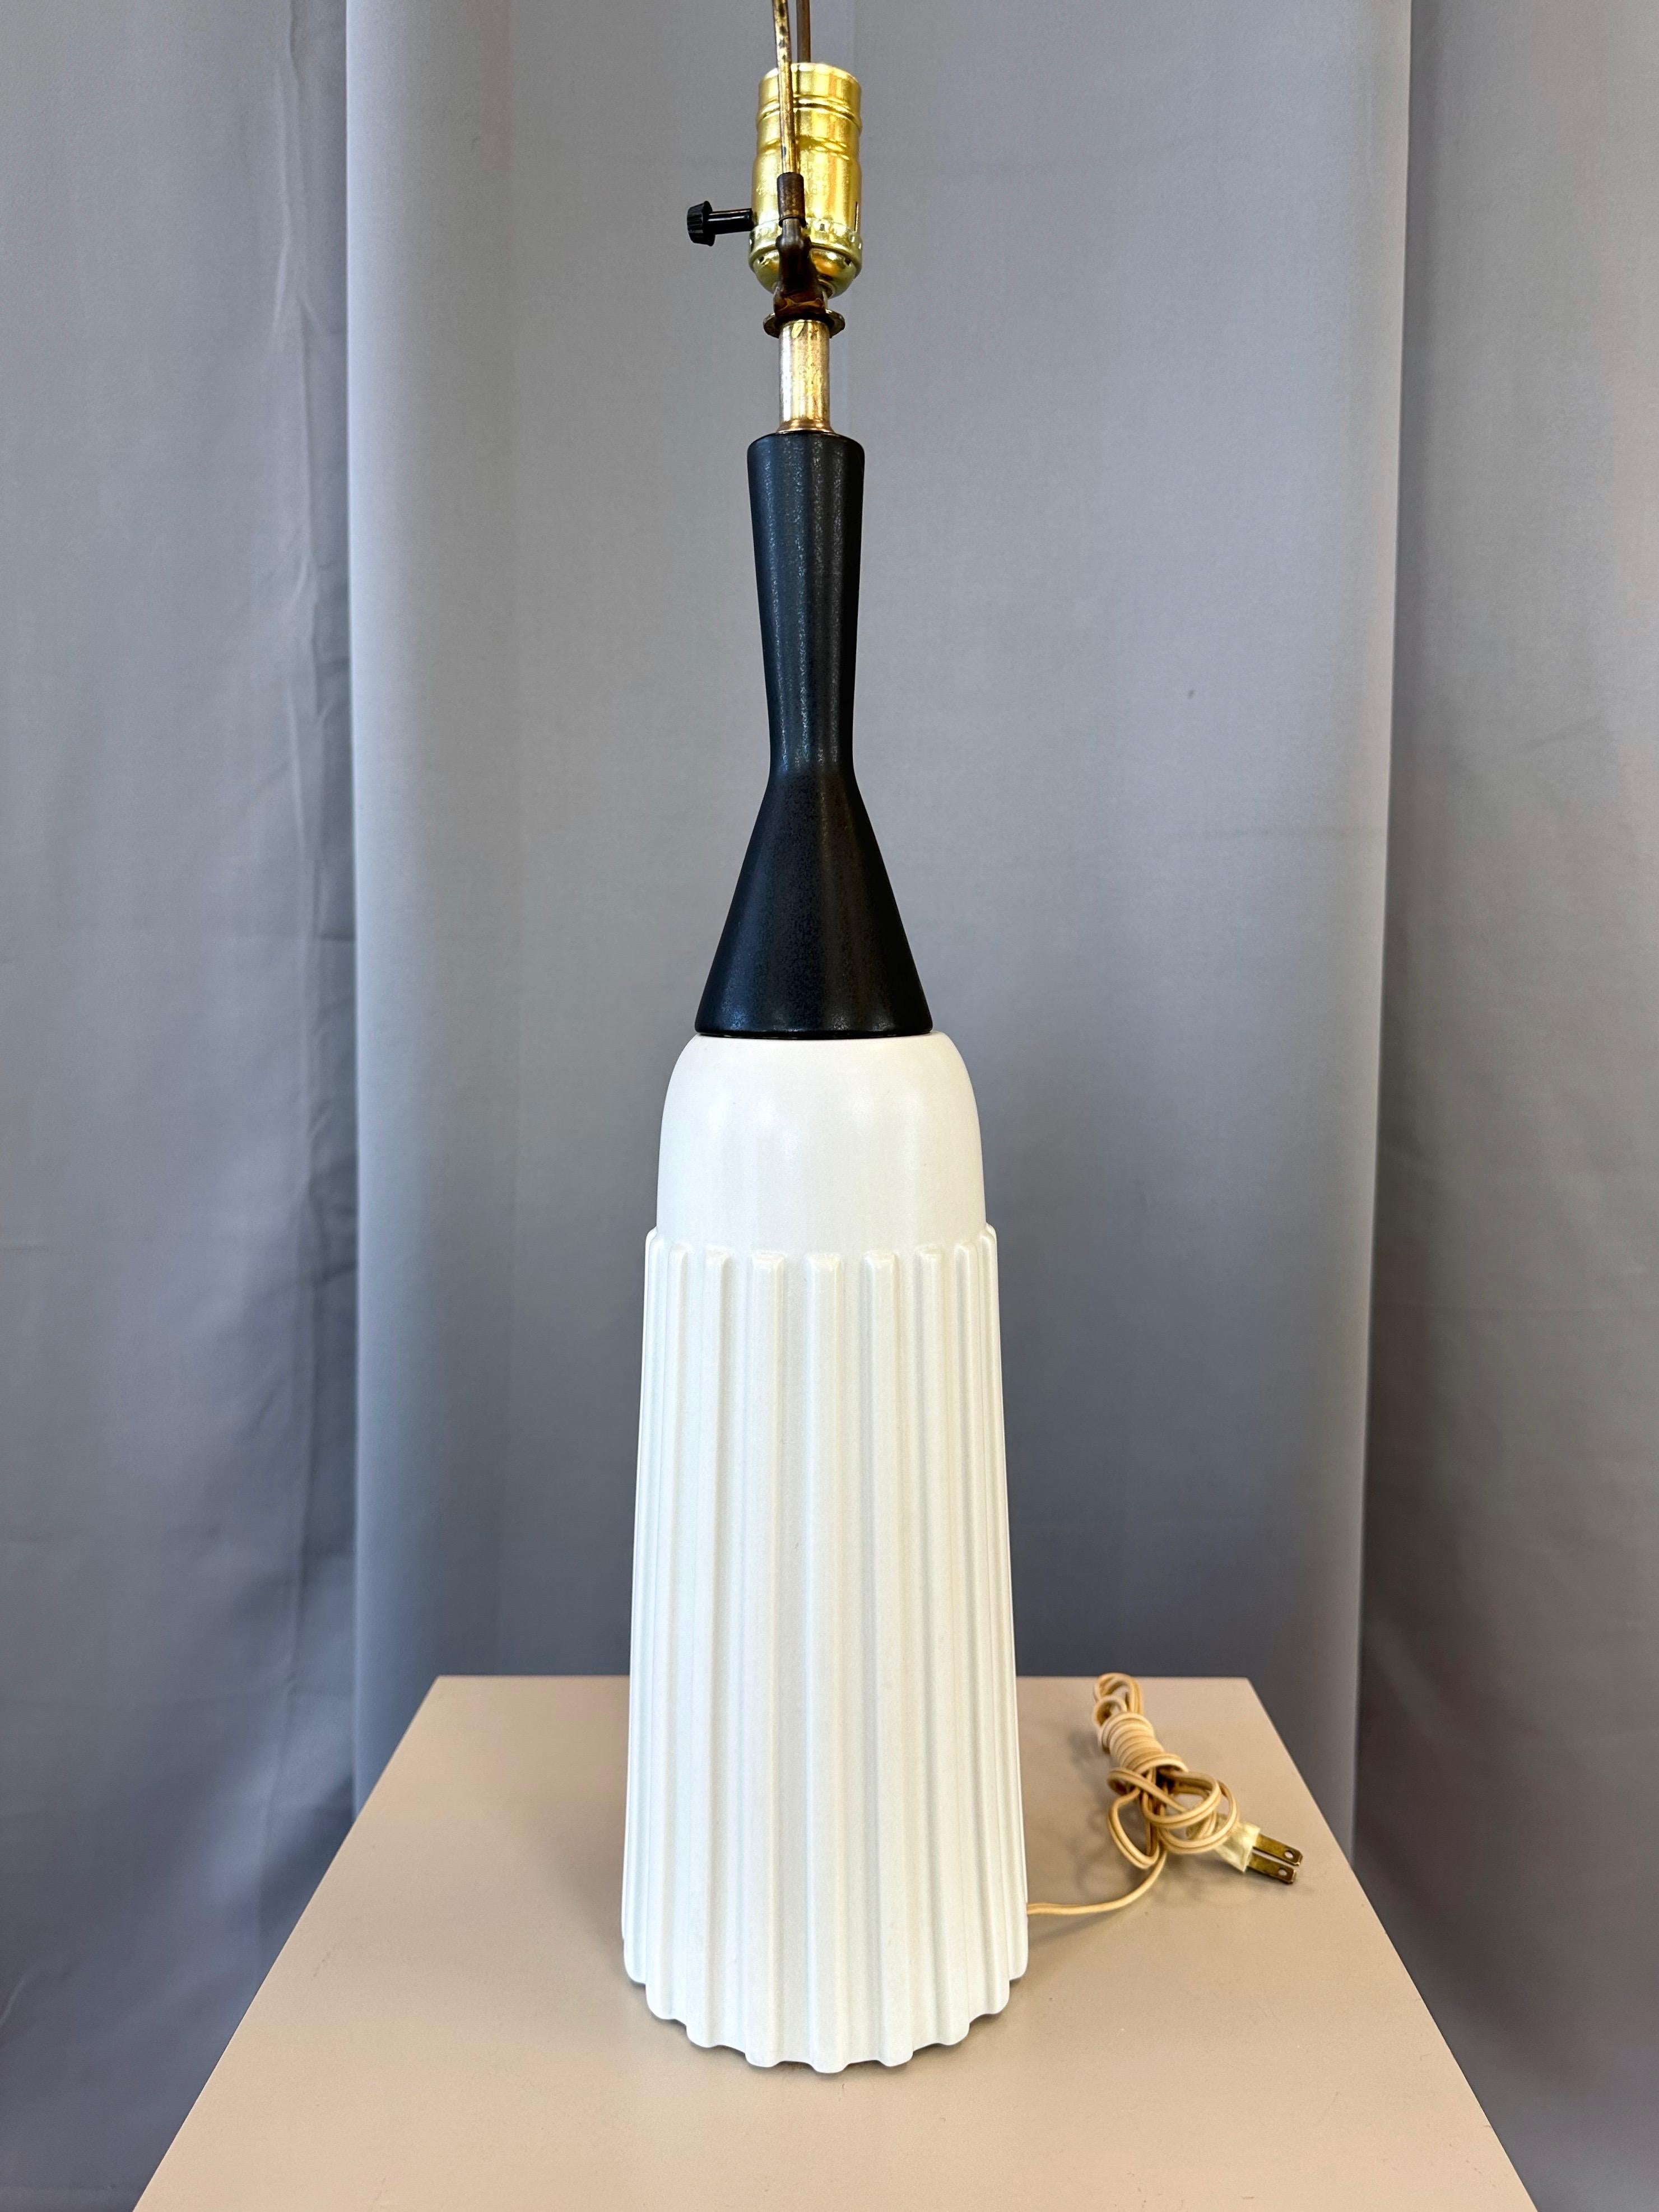 Mid-20th Century Mid-Century Modern Black & White Ceramic Ribbed Bottle-Shaped Table Lamp, 1950s For Sale